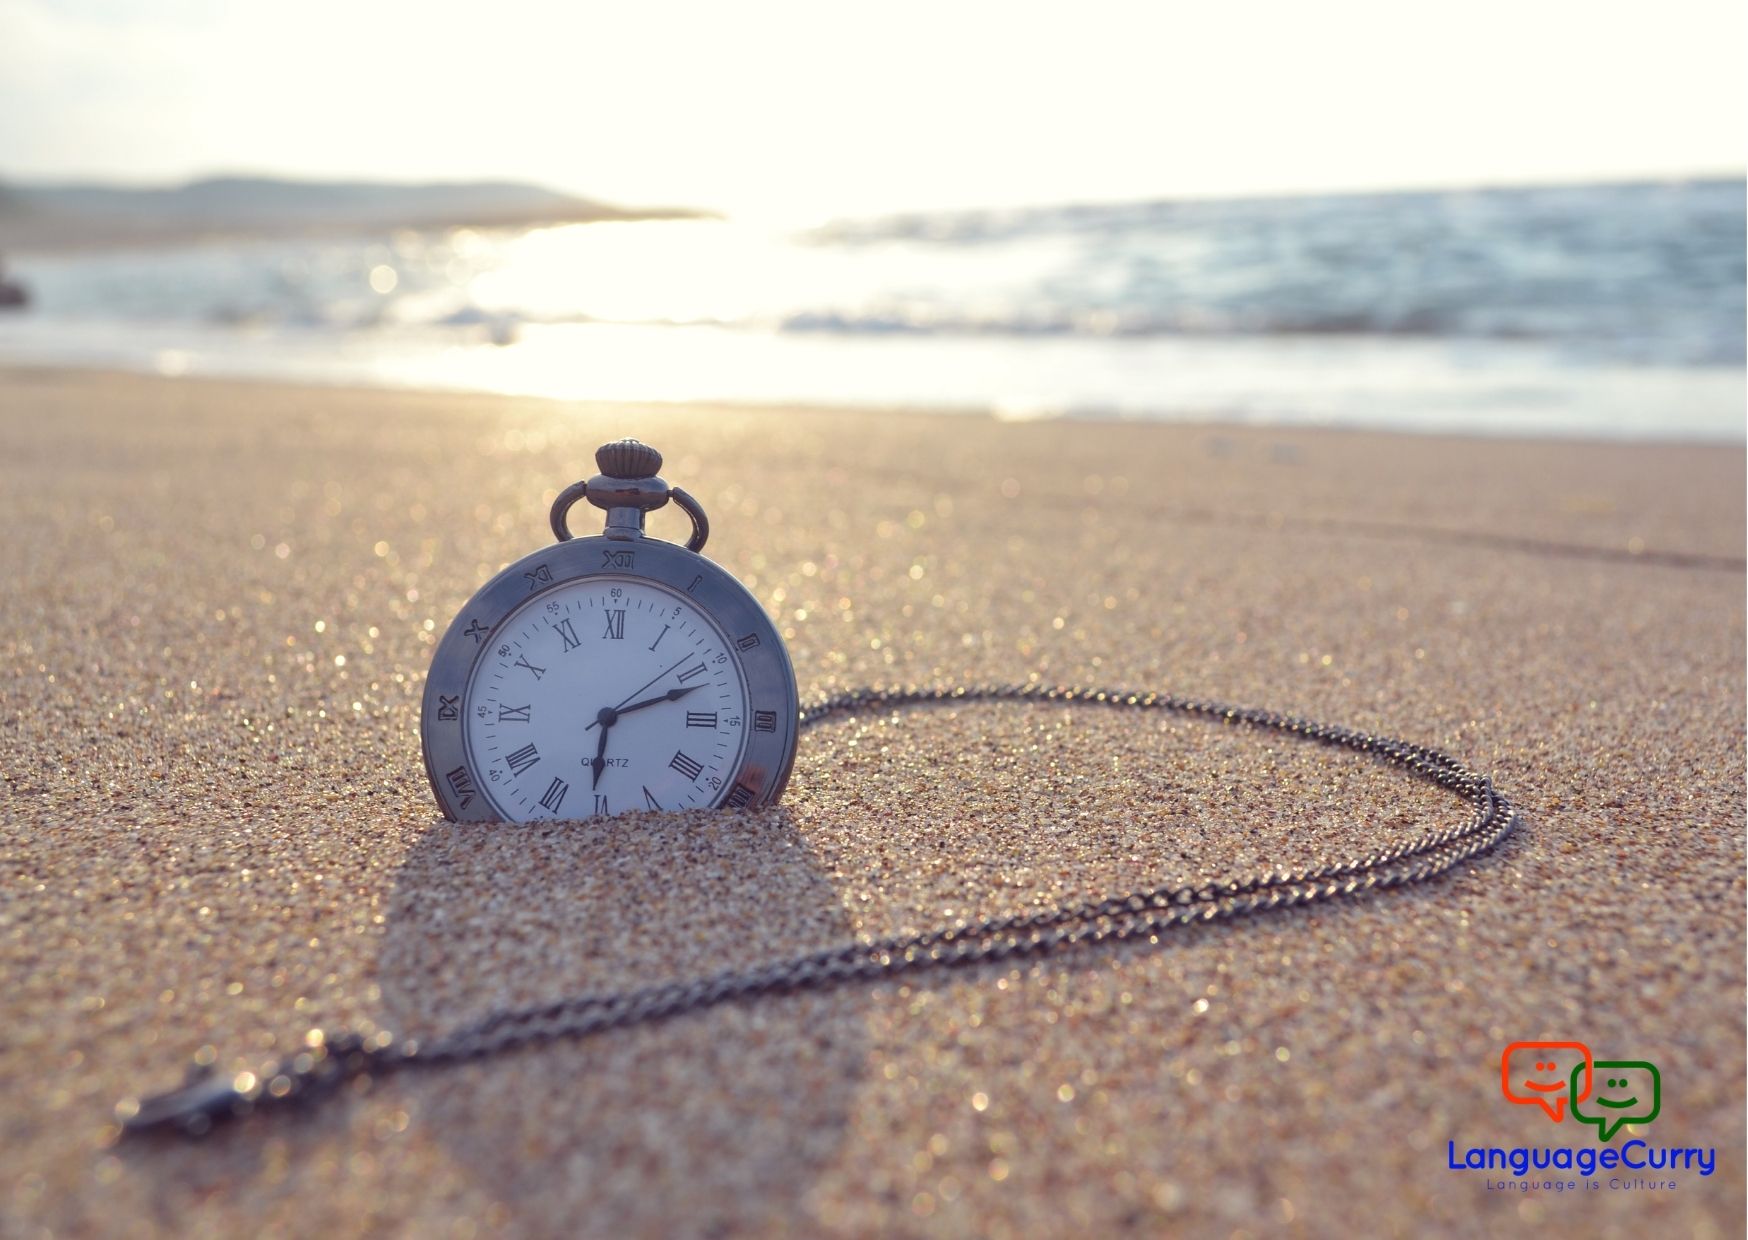 a pocket watch kept in sand on a beach